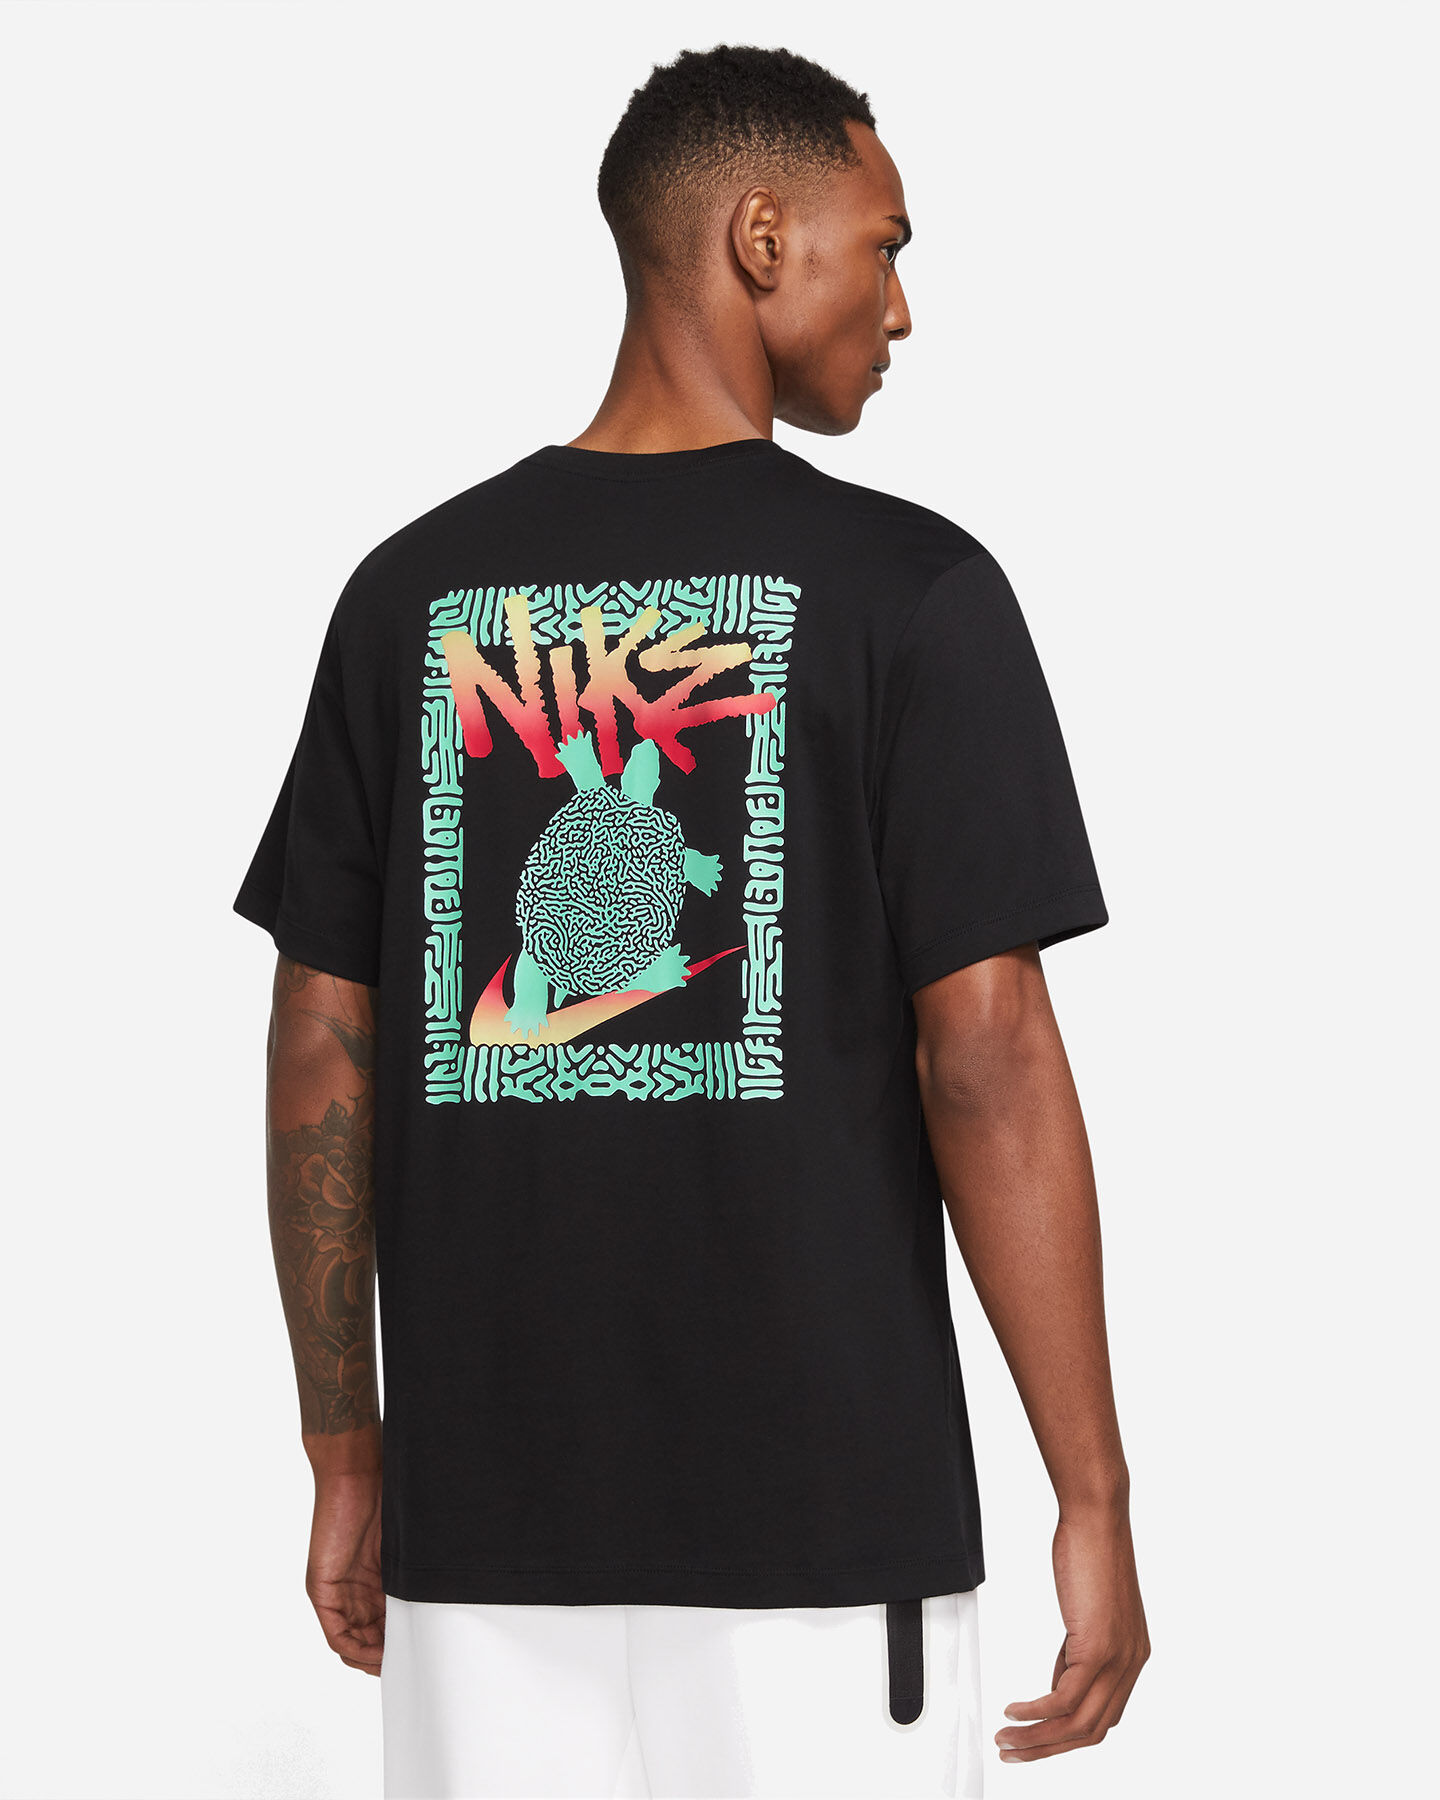  T-Shirt NIKE FESTIVAL TURTLE M S5437164|010|XS scatto 1